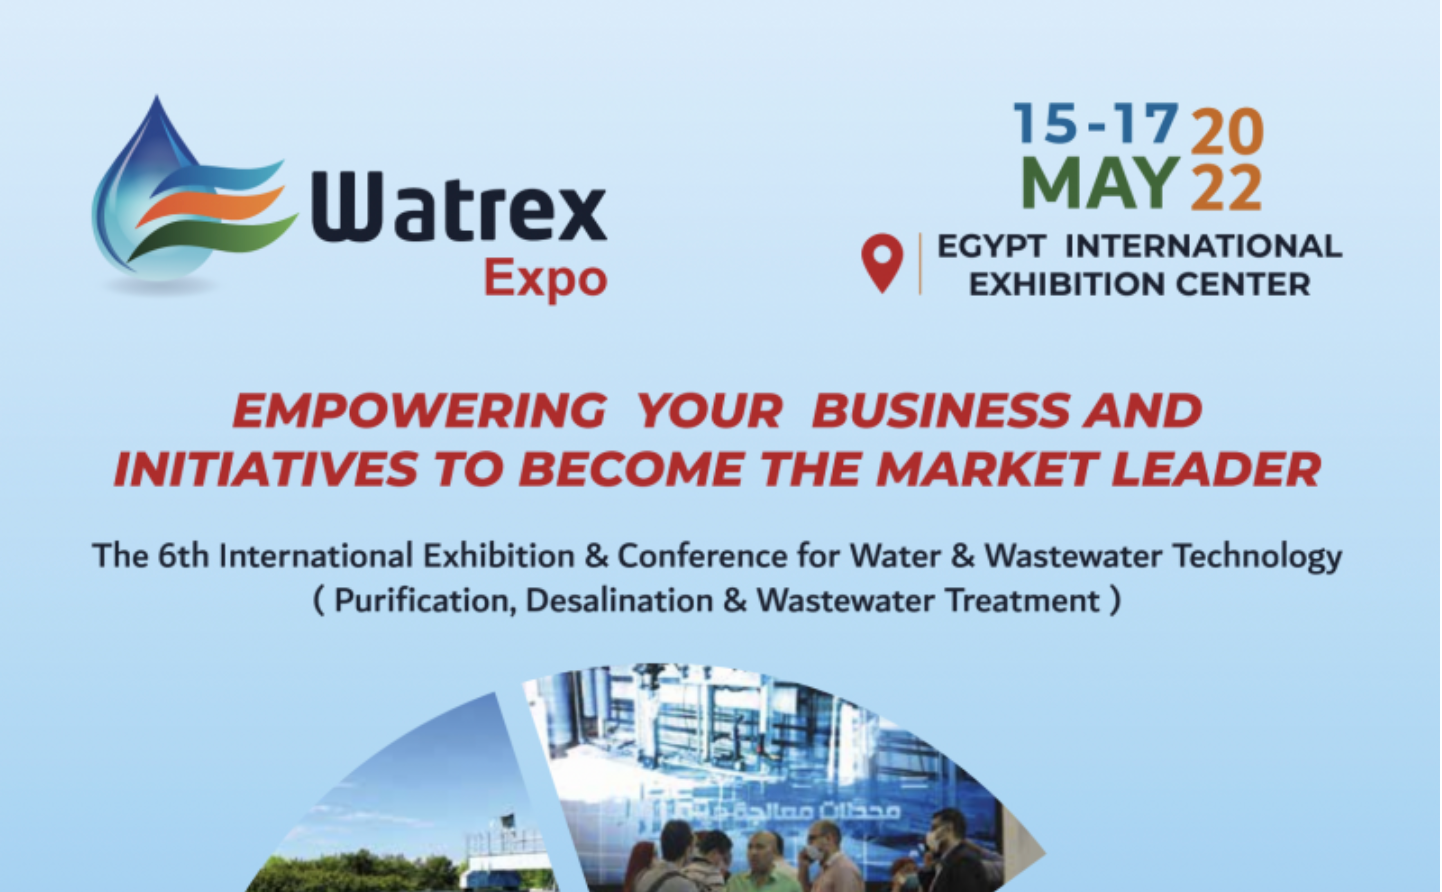 6th International Expo & Conference for Water & Wastewater Technology